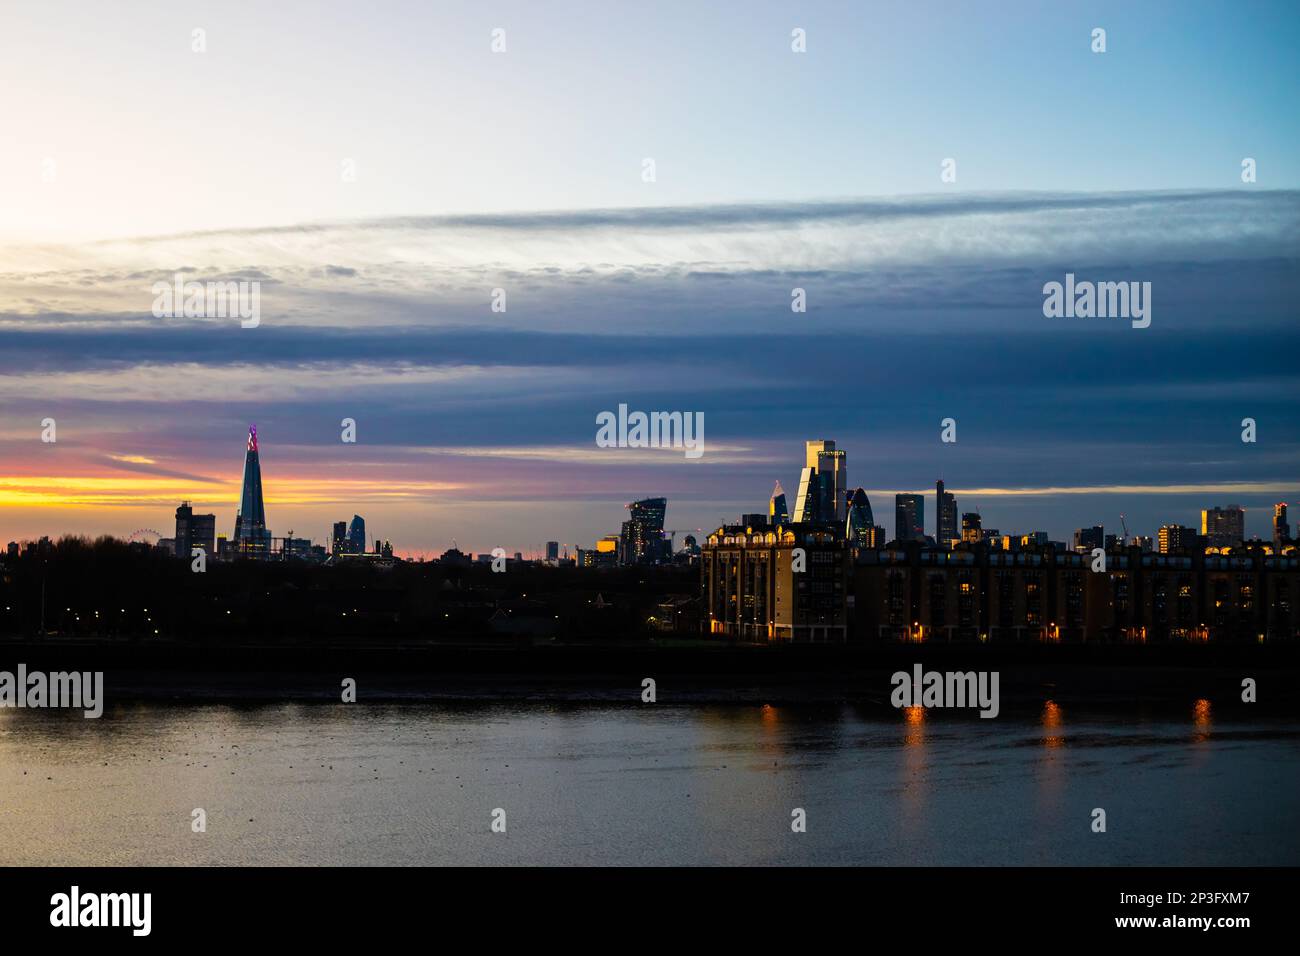 Sunset over the City of London and the Thames on a still day. The setting sun casts a beautiful twilight glow onto the buildings. Stock Photo